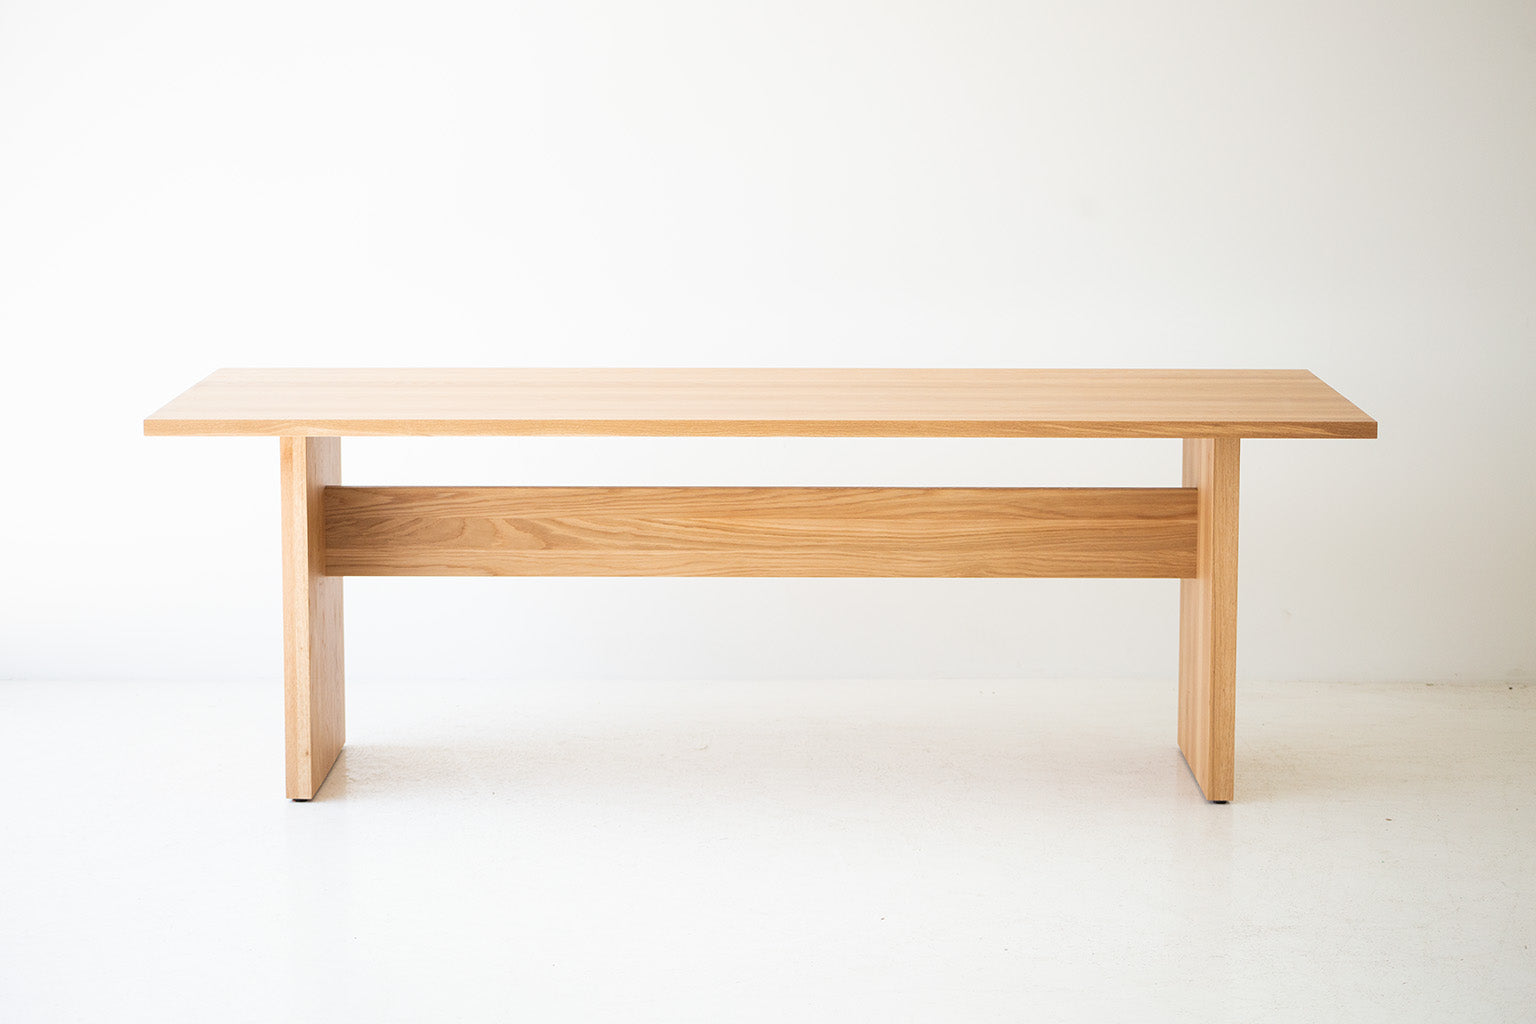 White Oak Dining Table - The Toko - 2922